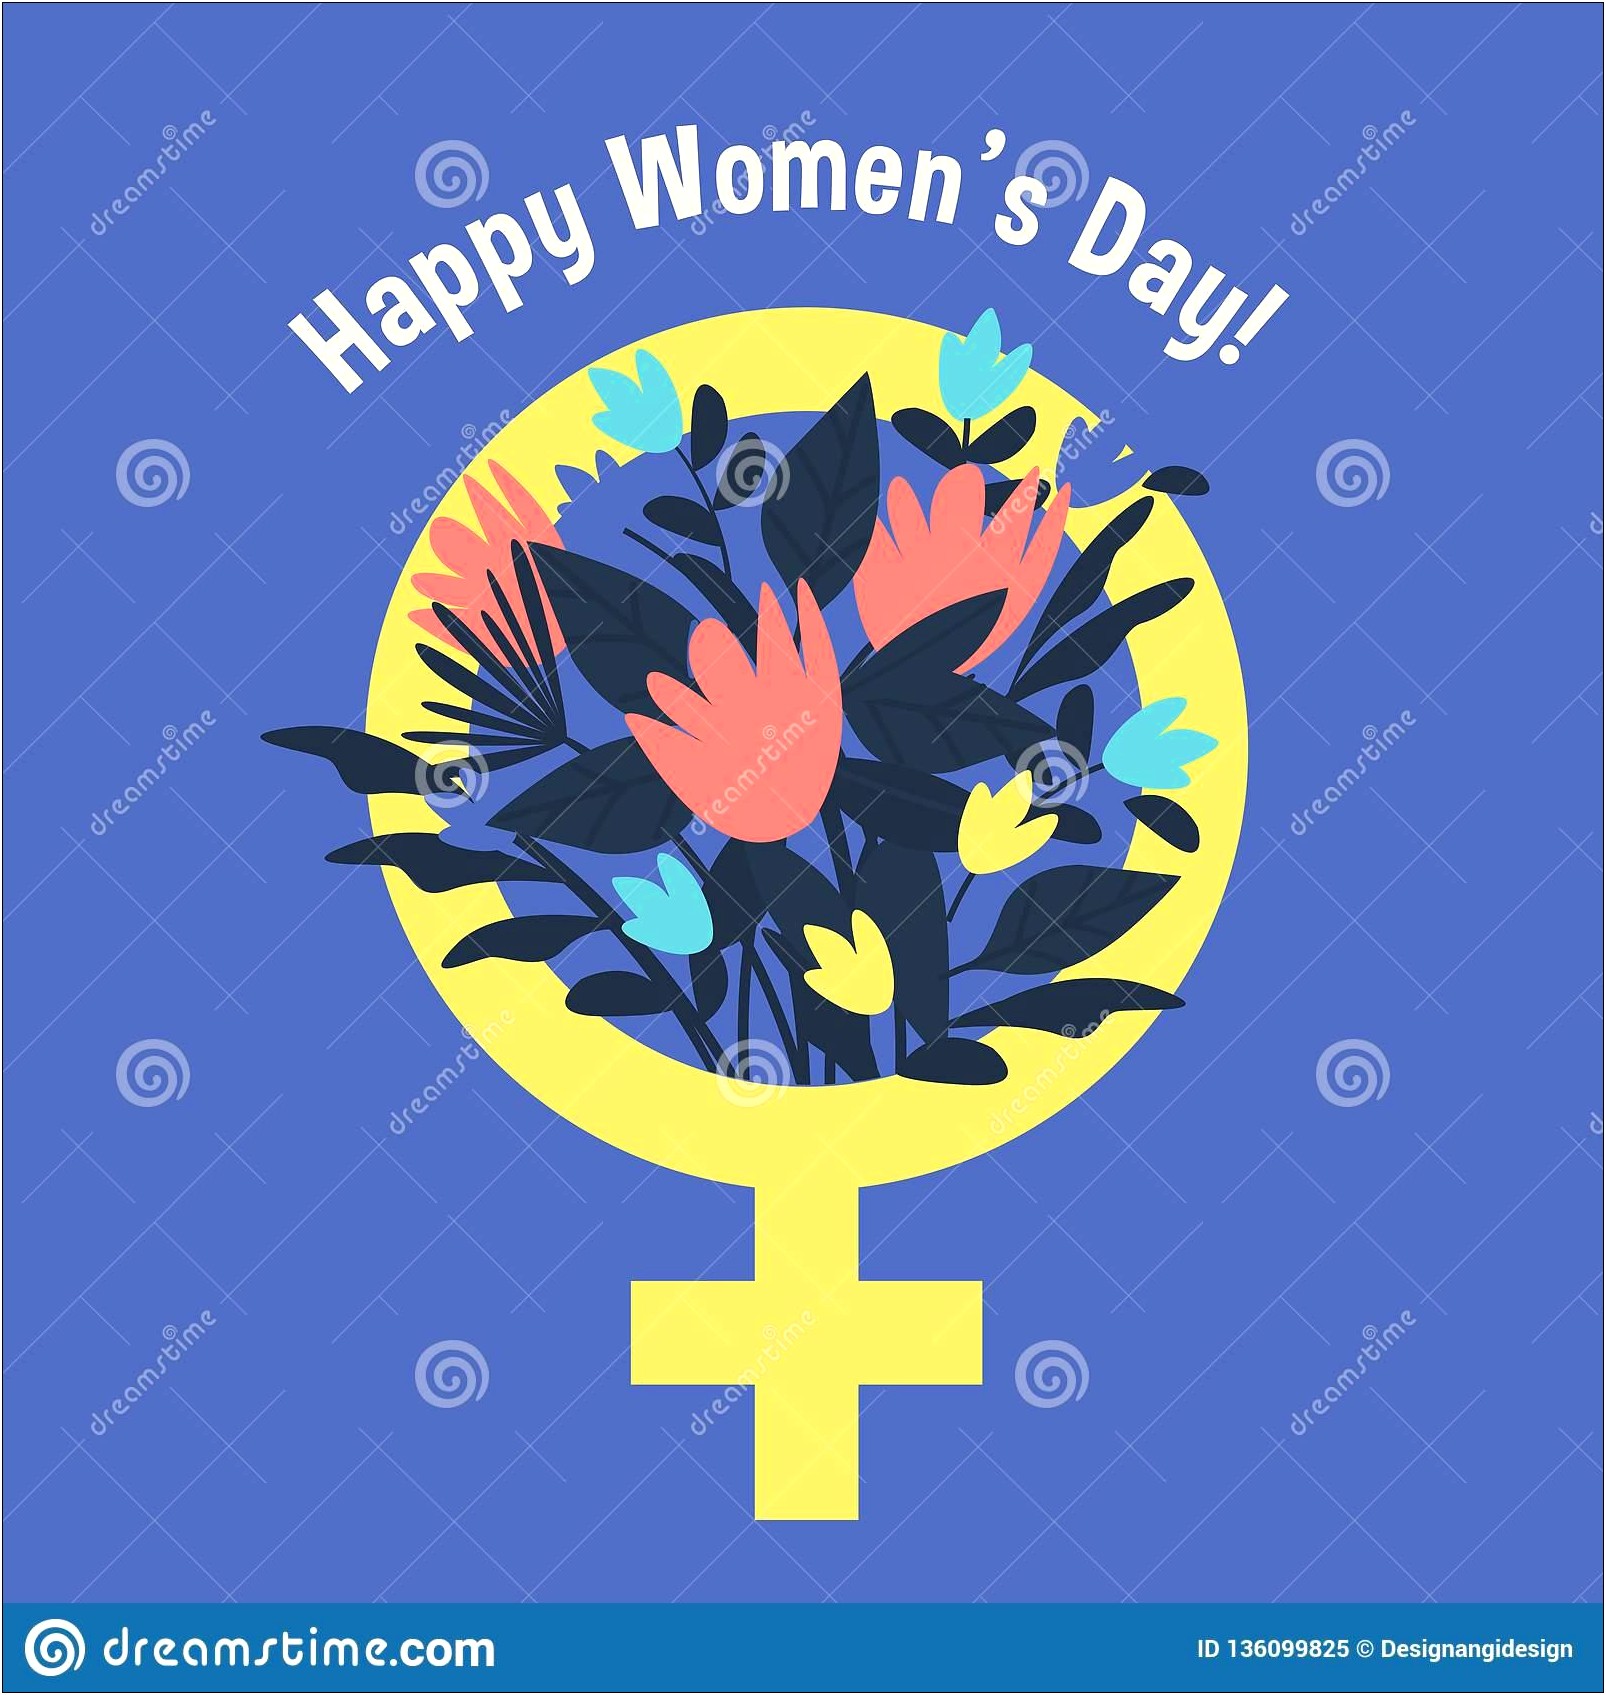 Free Women's Day Flyer Templates